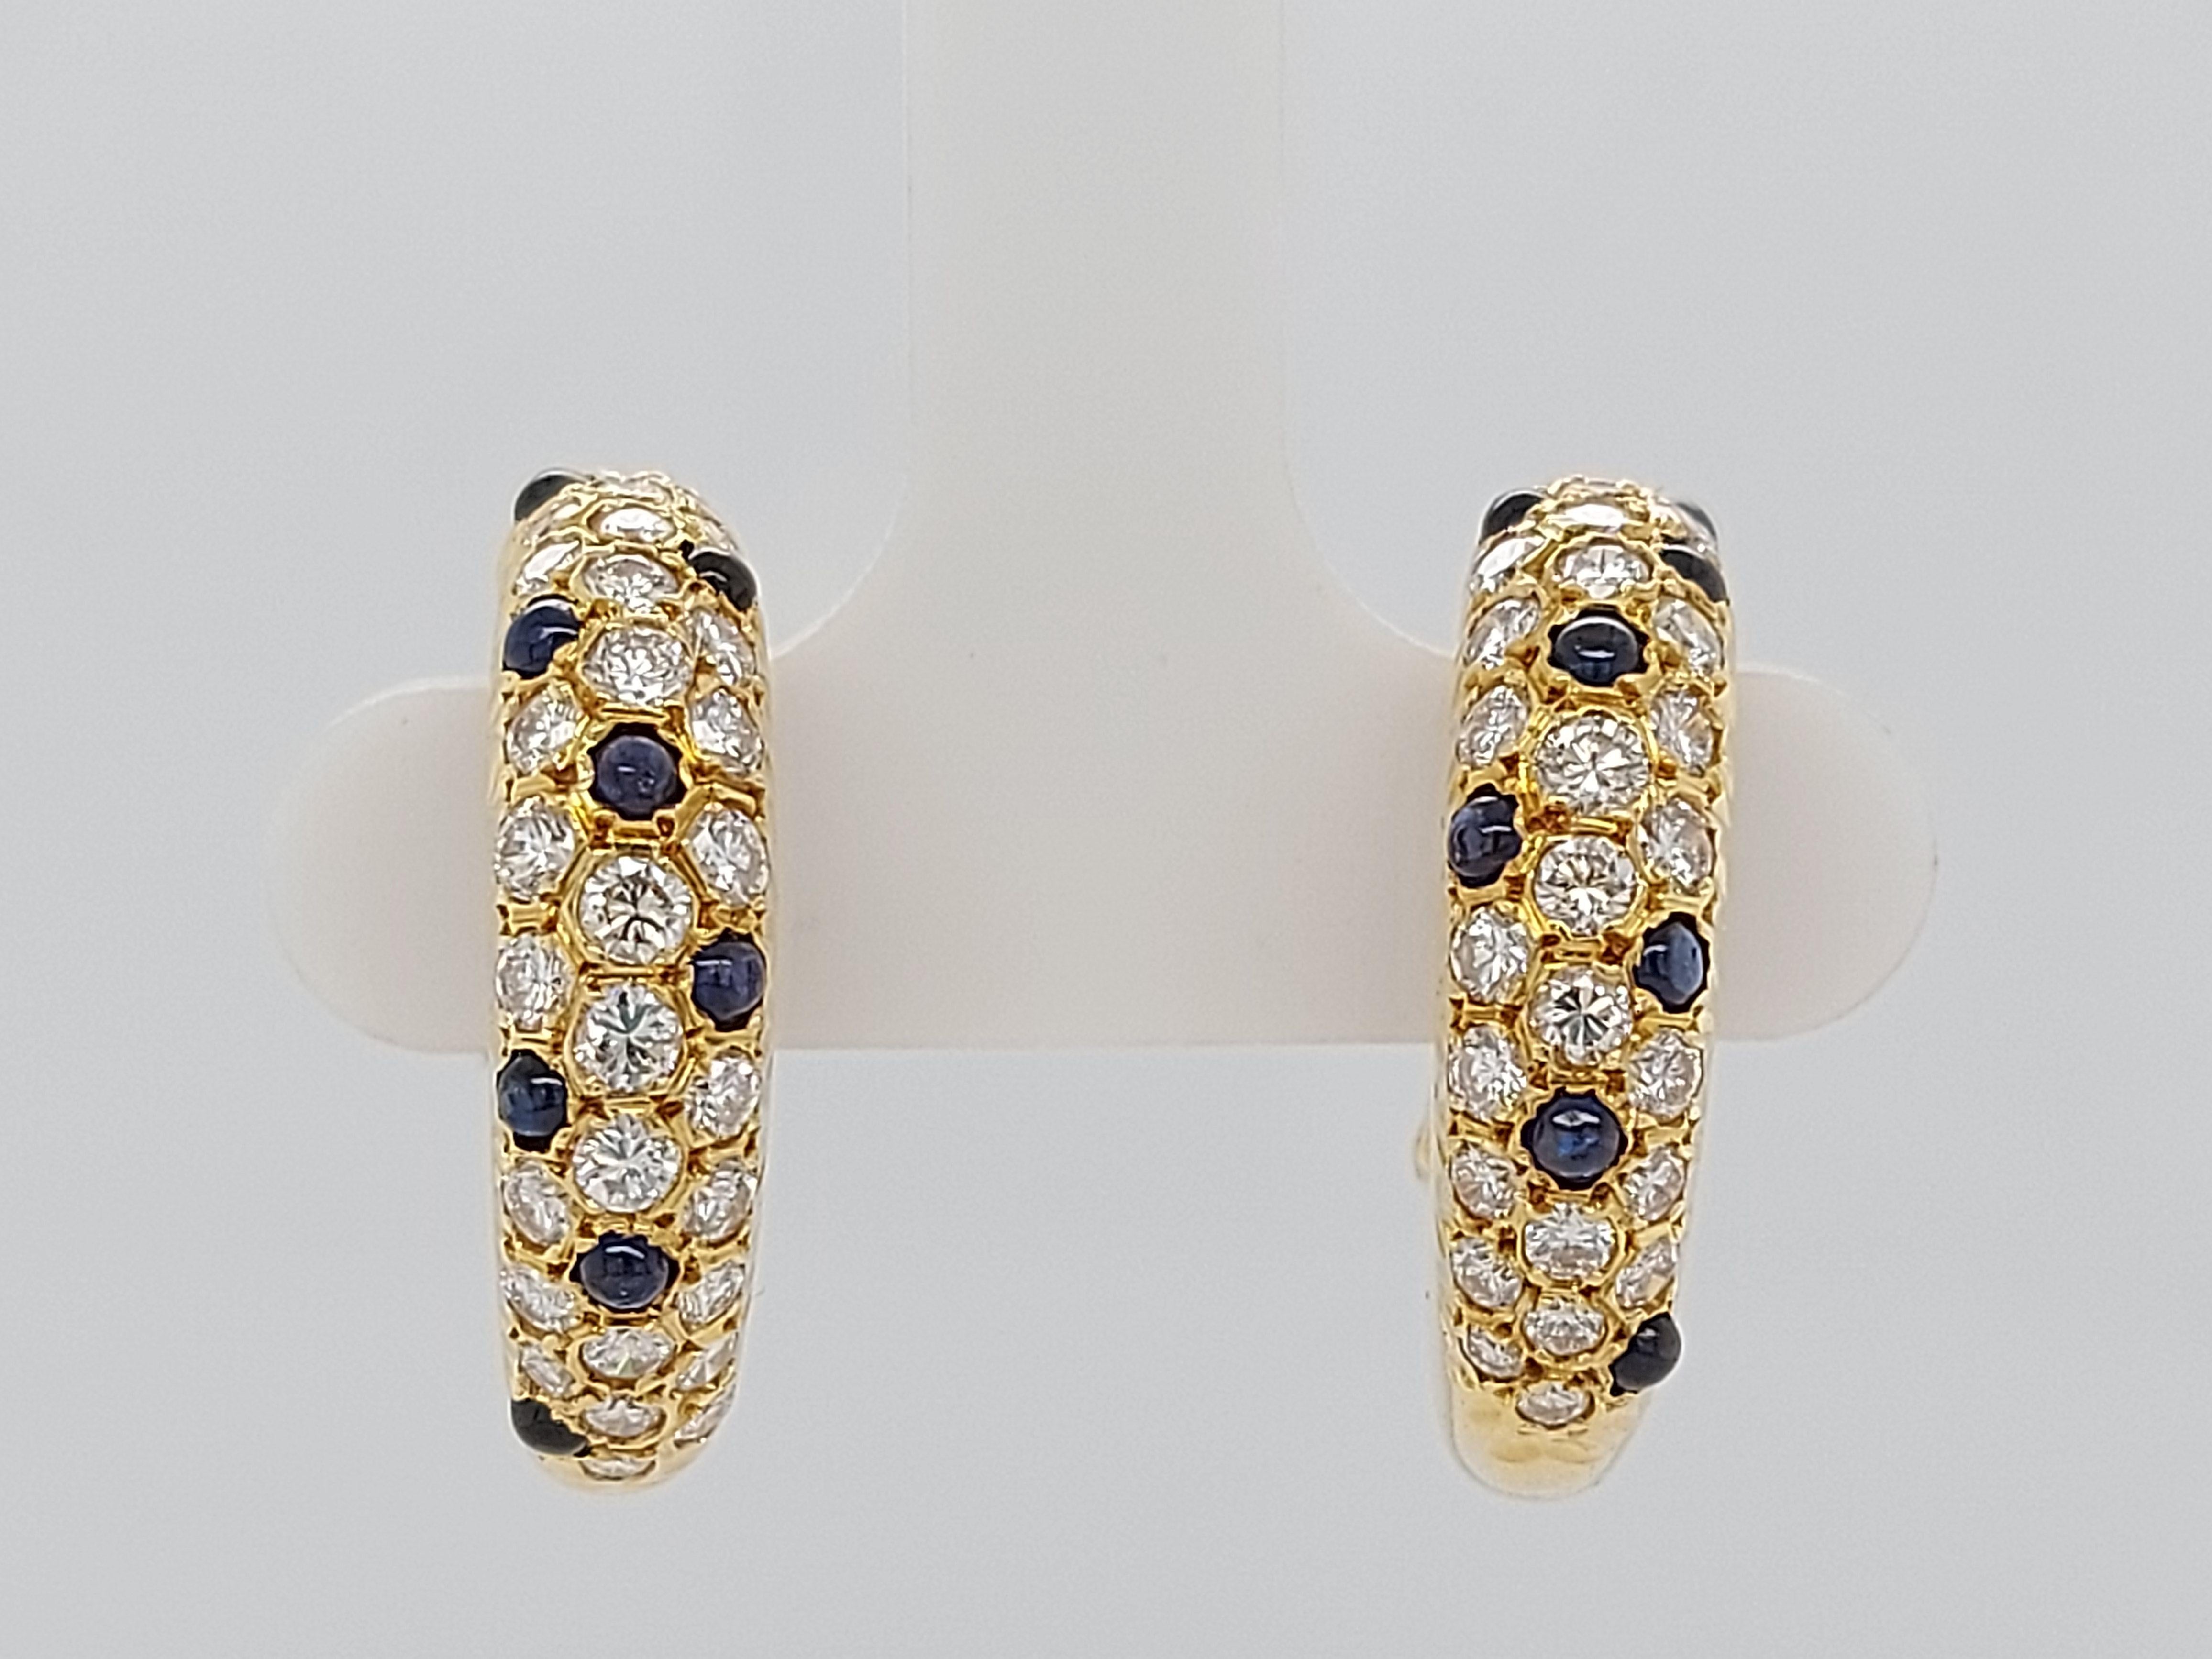 Fred Paris Stunning Very Secure Clip - On earrings with 16 sapphires and 60 diamonds.

Diamonds: 60 brilliant cut diamonds

Sapphire: 16 sapphires

Material: 18 kt yellow gold

Total weight: 12.8 gram / 0.450 oz / 8.2 dwt

Measurements: Diameter 21